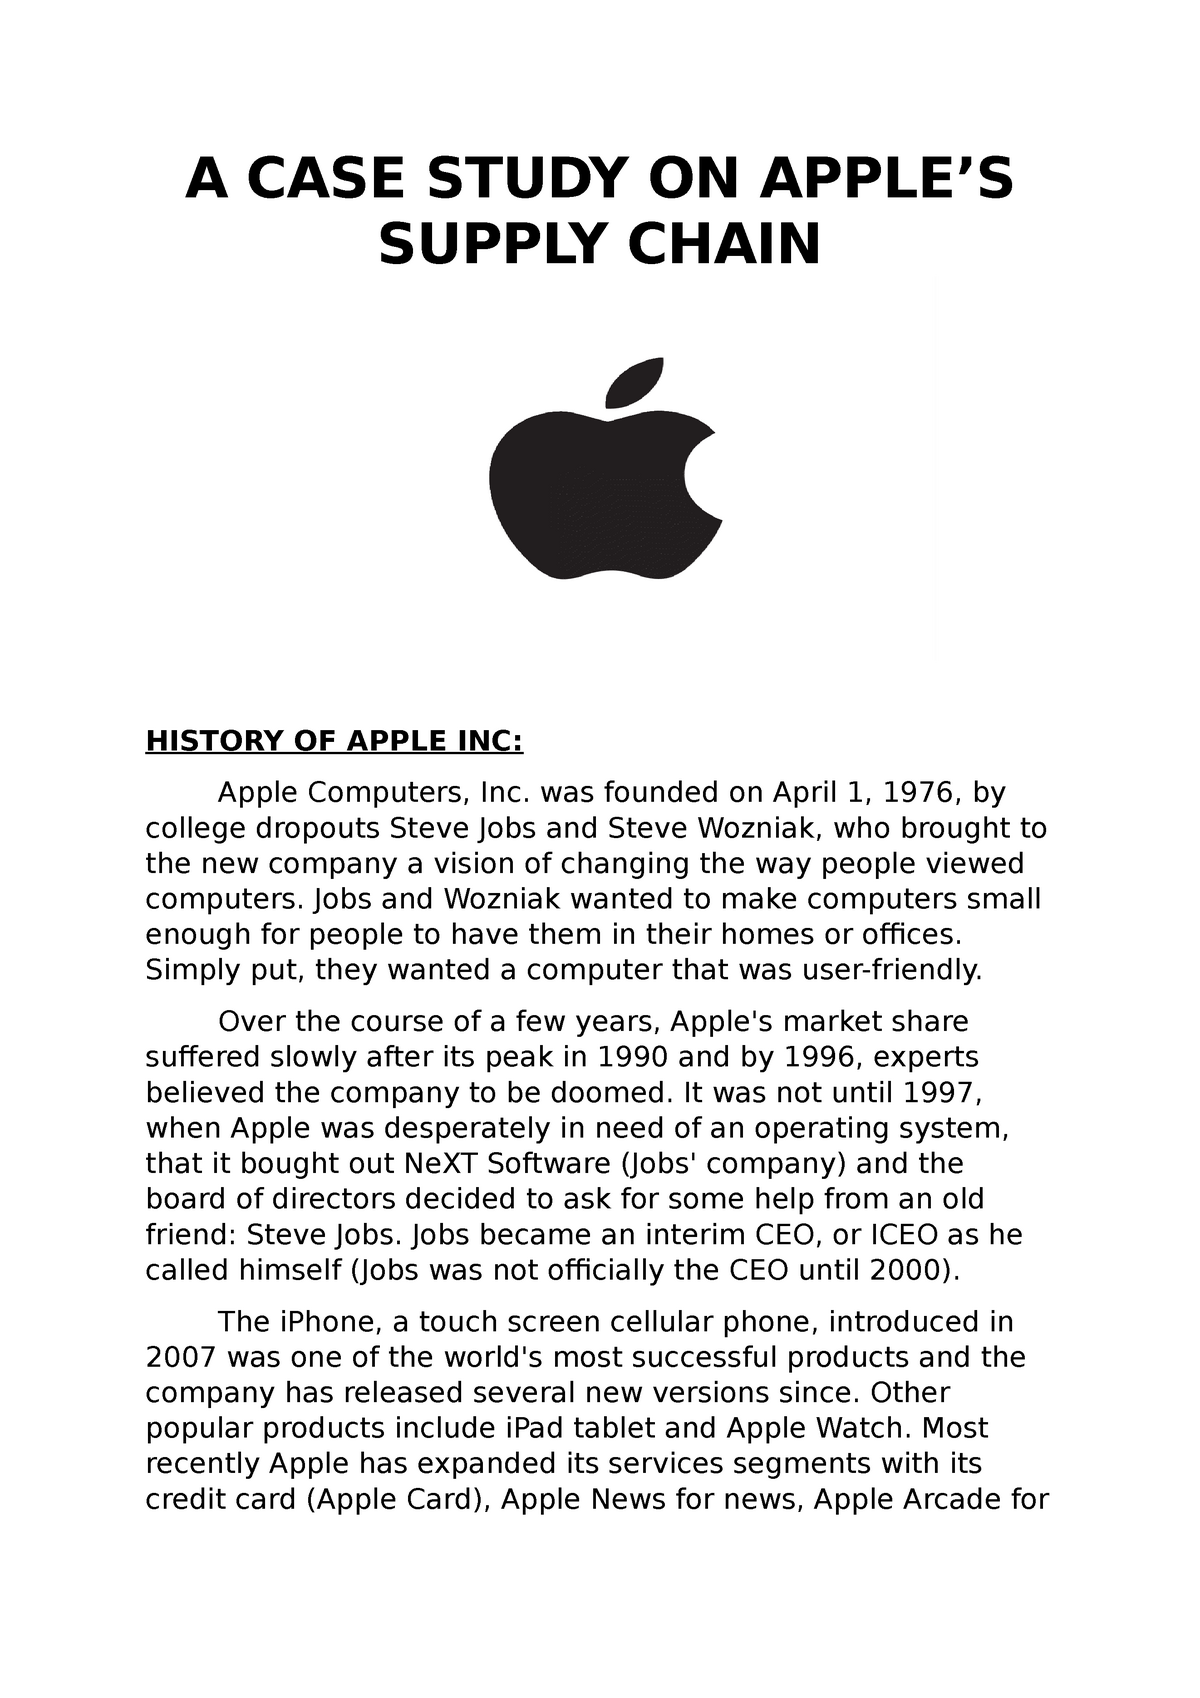 apple case study harvard business review